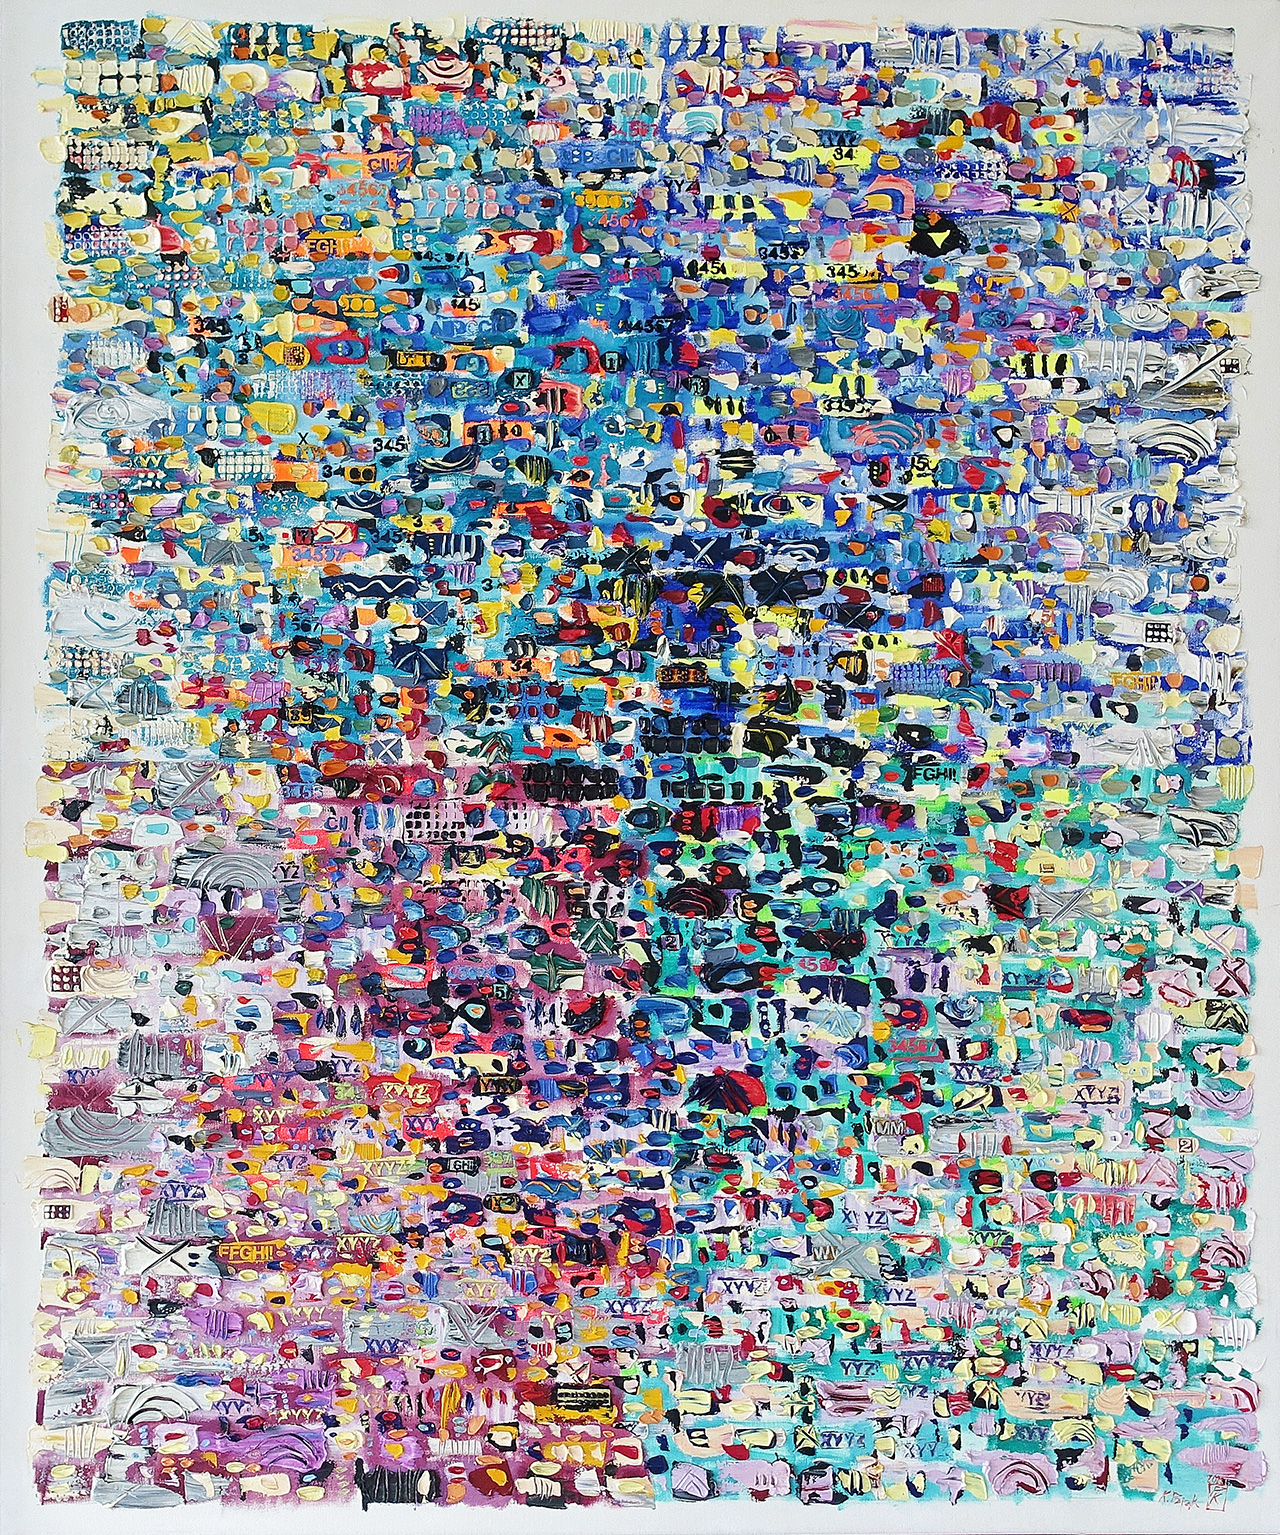 Krzysztof Pająk - Scattered Galaxy. DNA codes (Oil on Canvas | Size: 106 x 126 cm | Price: 12000 PLN)